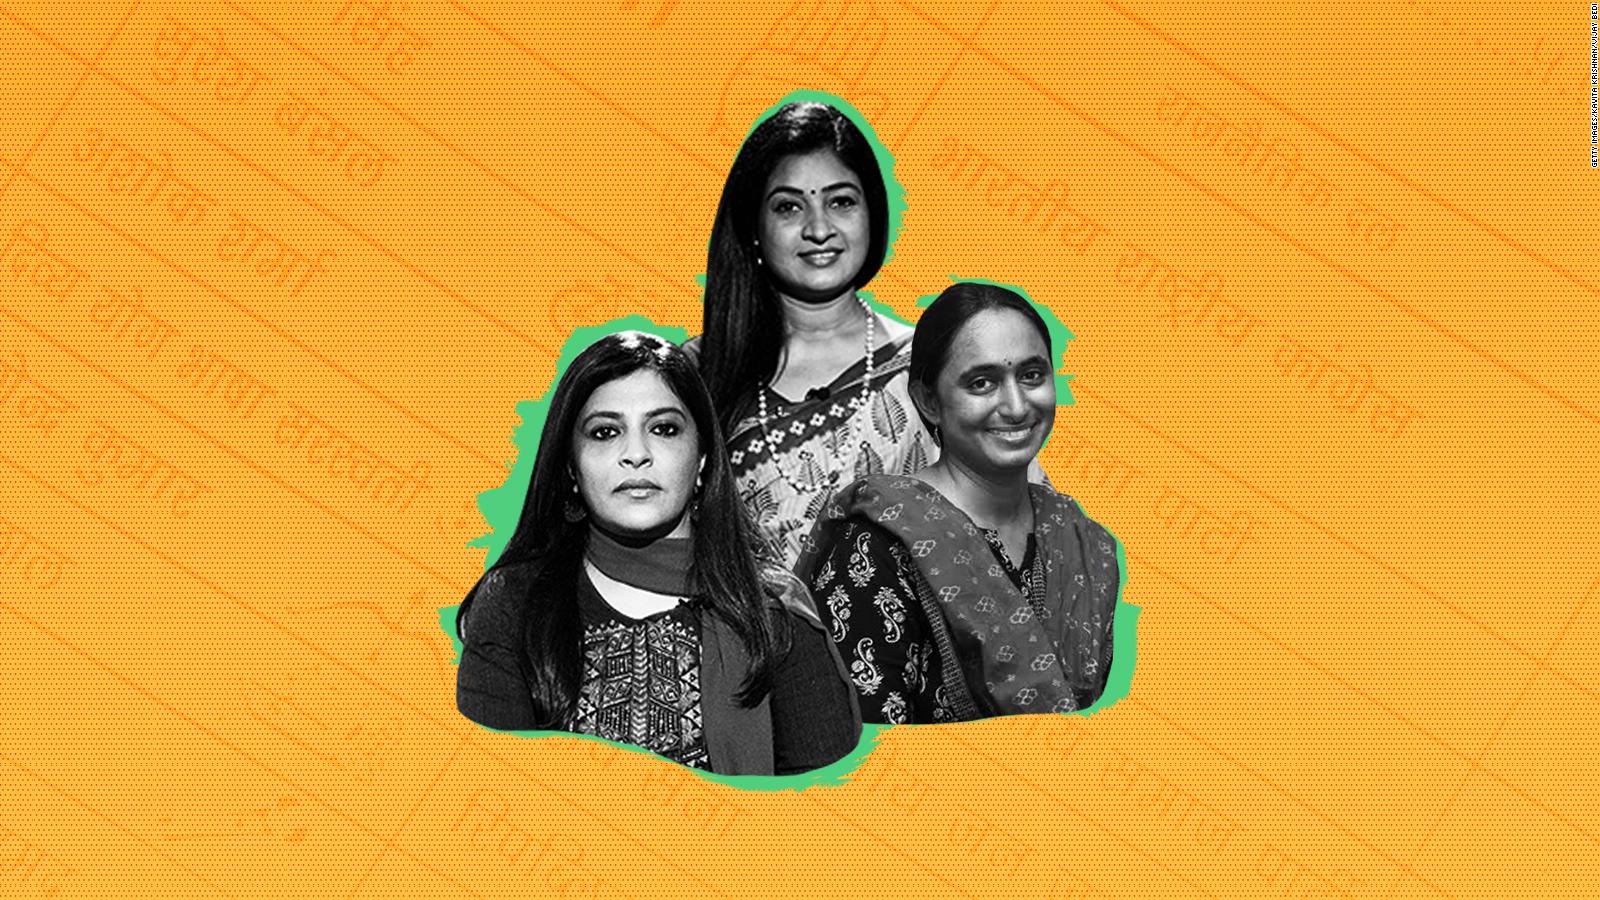 Sexy Video Sleeping Brother Rep - Troll armies, 'deepfake' porn videos and violent threats. How Twitter  became so toxic for India's women politicians - CNN